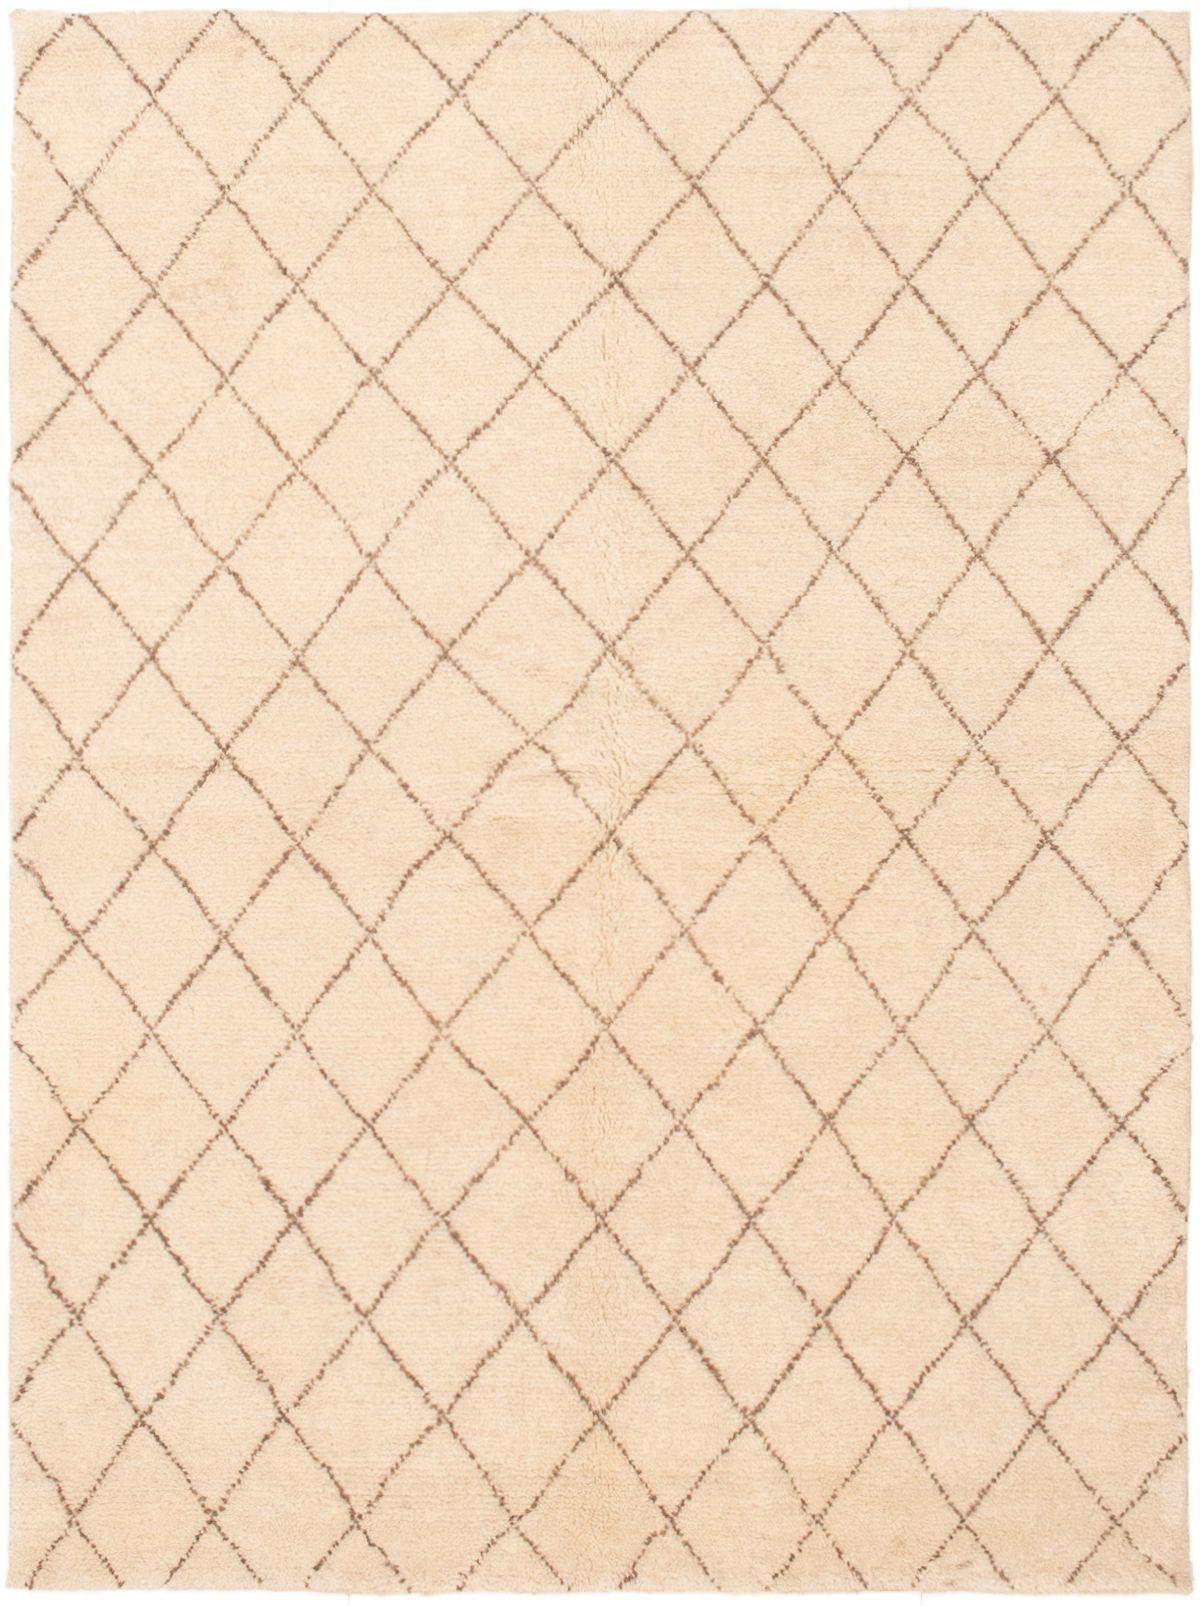 Hand-knotted Arlequin Cream Wool Rug 5'3" x 6'10" Size: 5'3" x 6'10"  